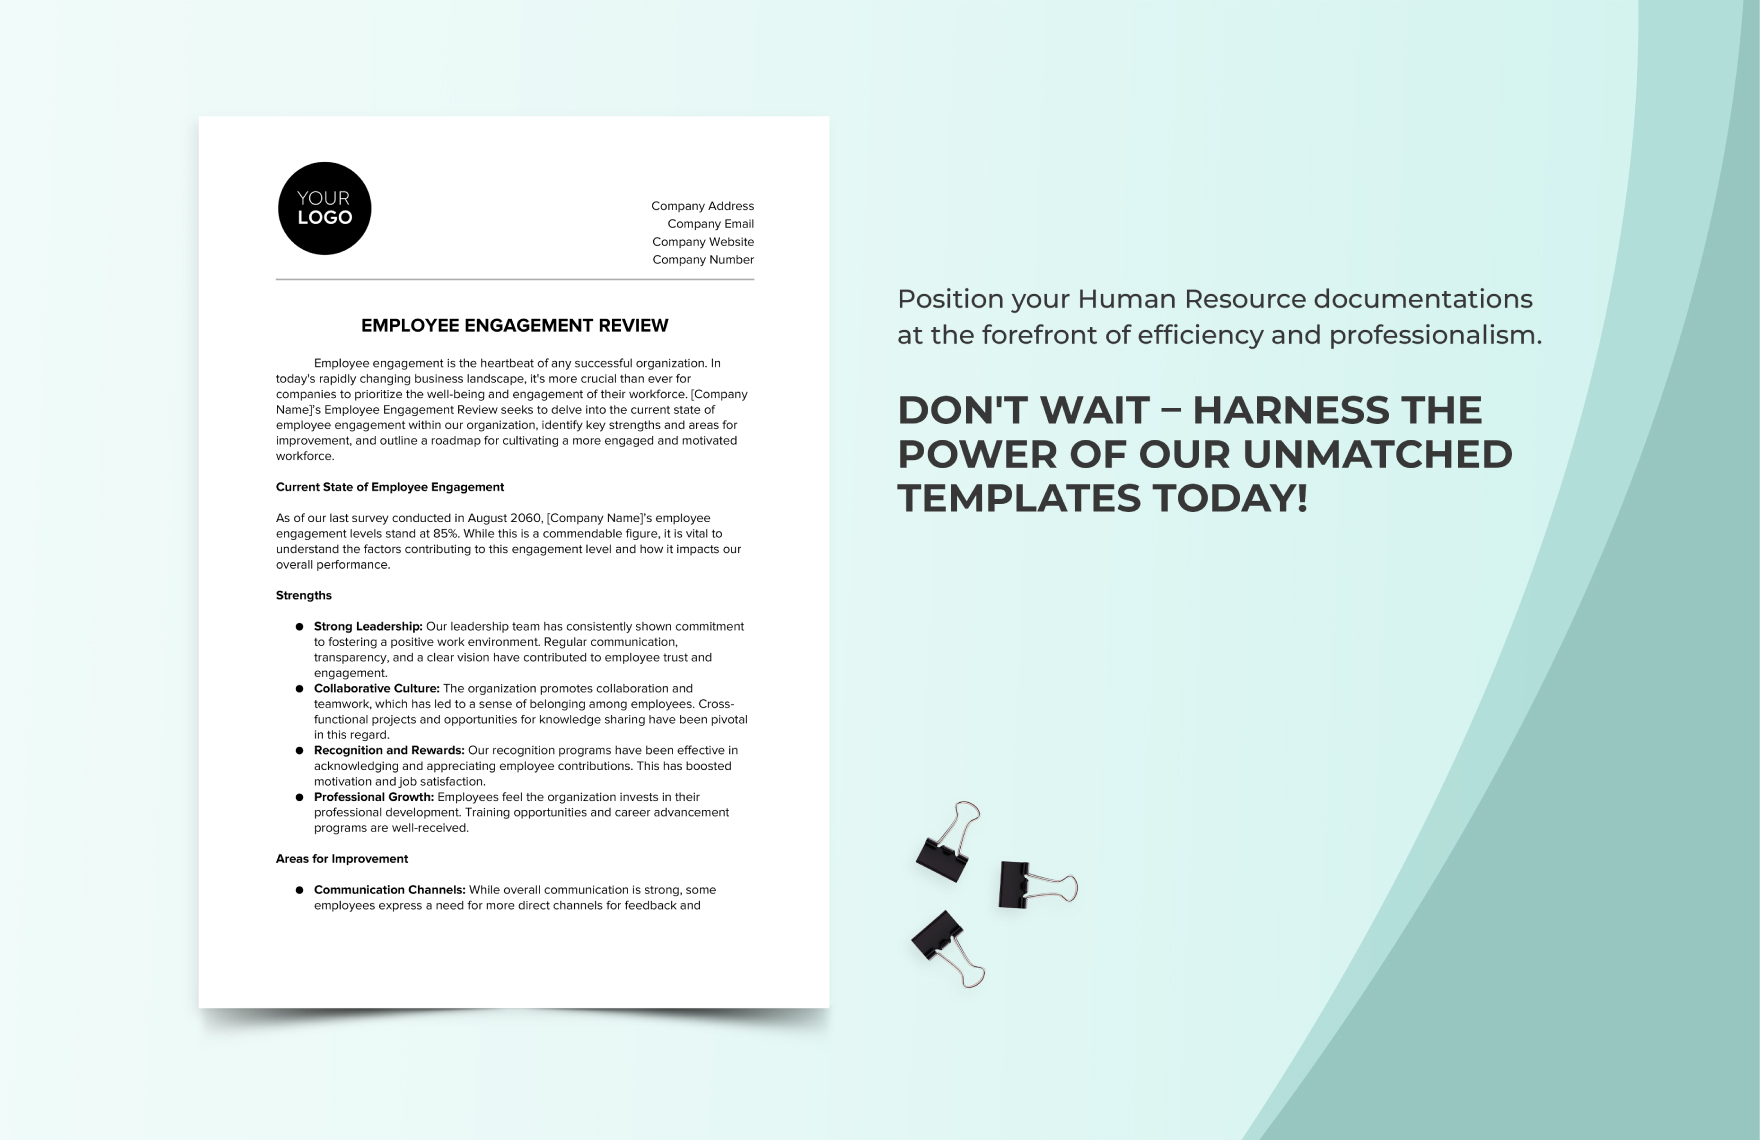 Employee Engagement Review HR Template